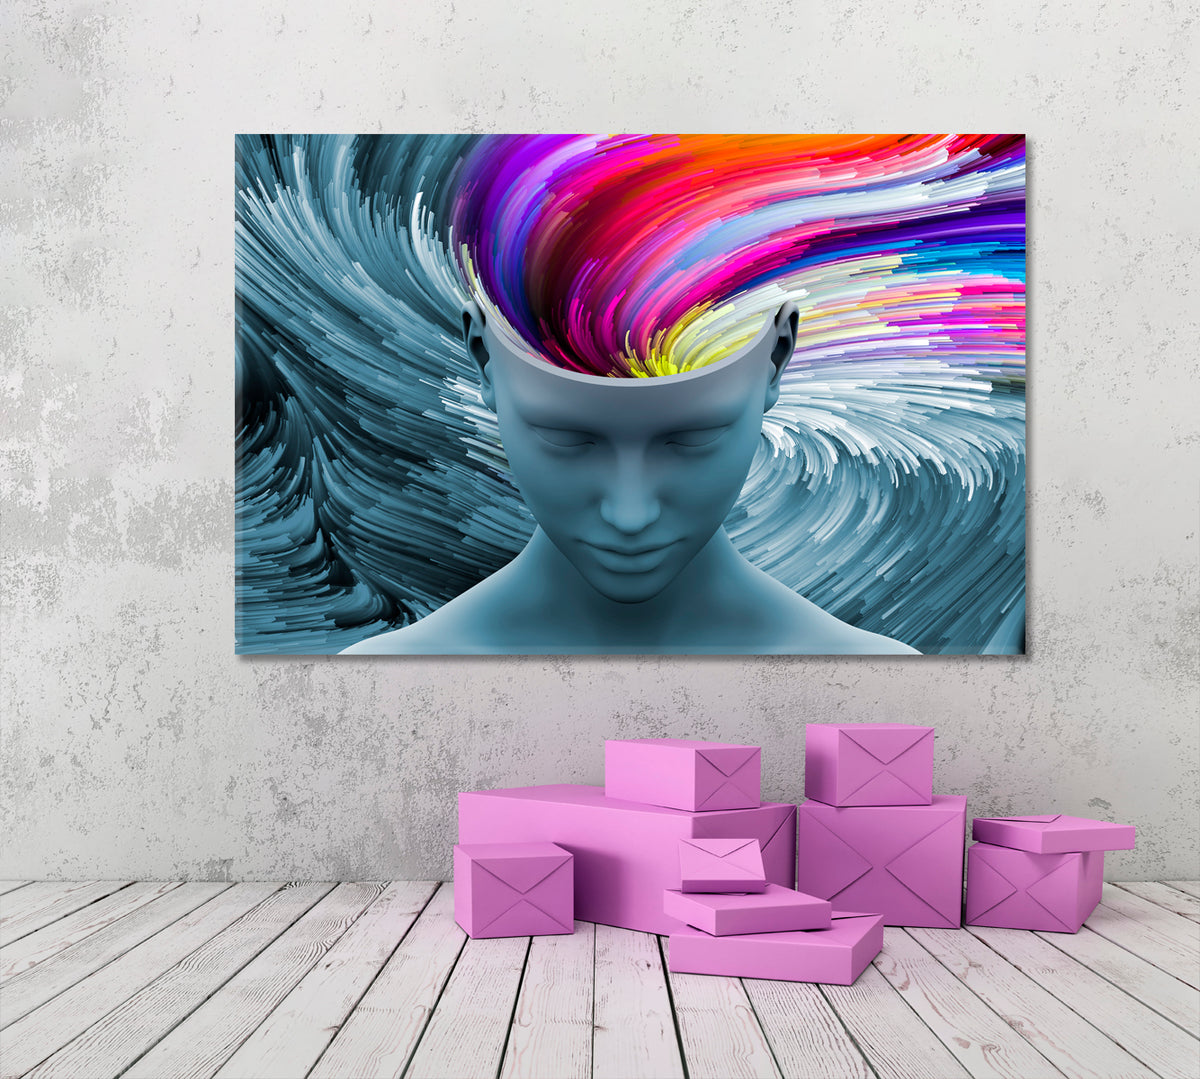 IMAGINATION AND DREAMS Swirls Color Motion Consciousness Art Artesty 1 panel 24" x 16" 